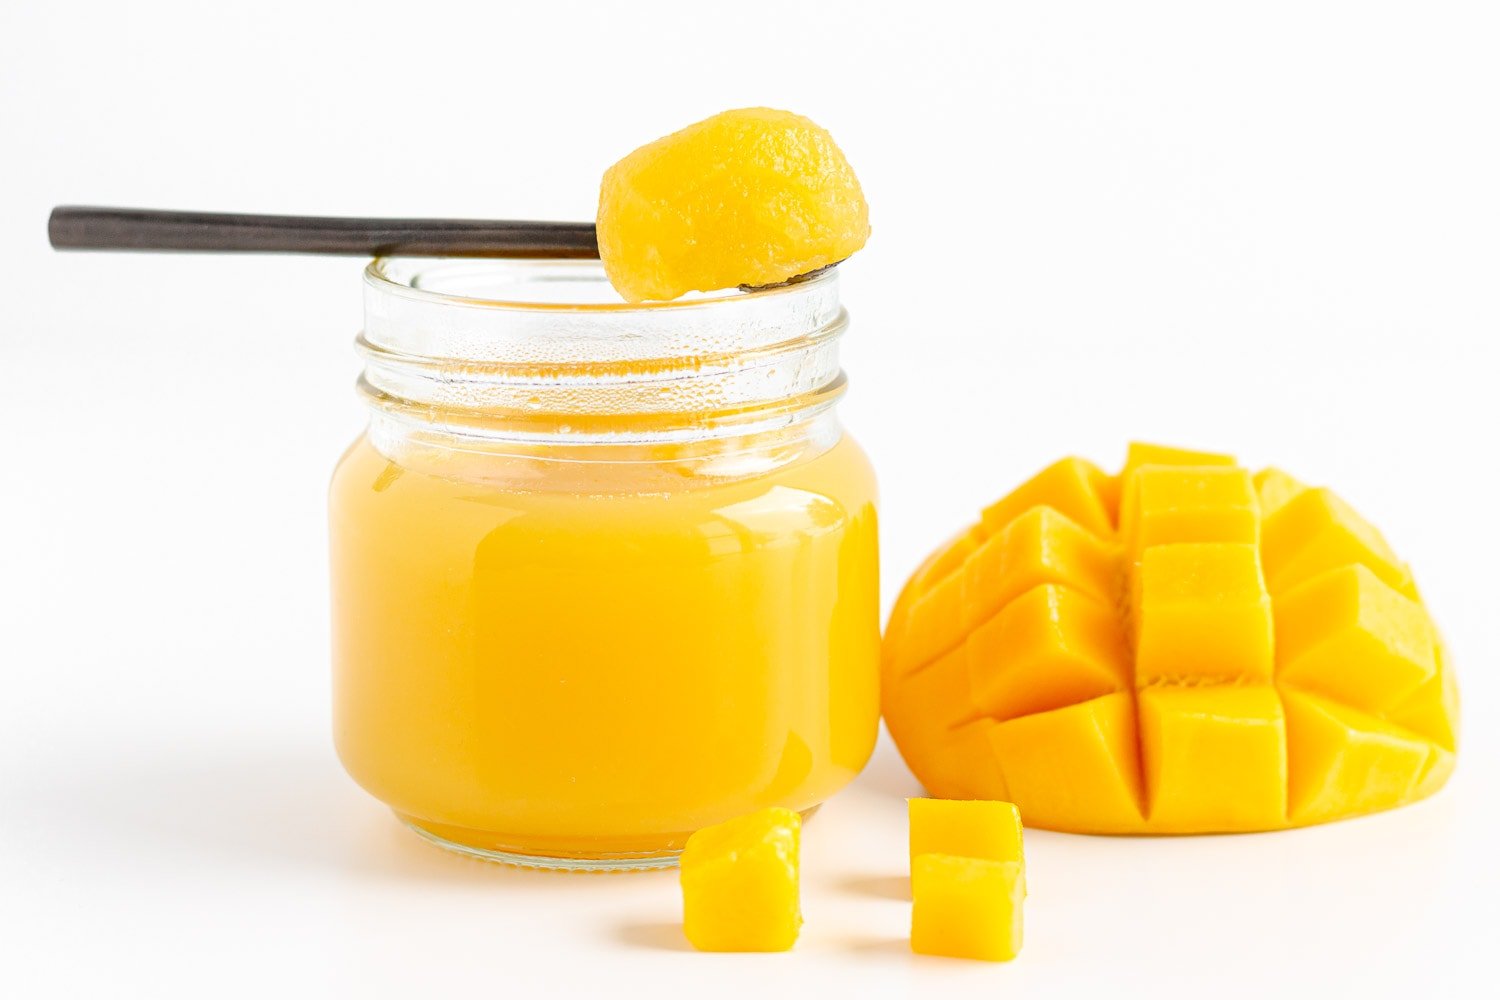 Mango jelly on a spoon set over a small glass jar filled with mango jelly beside some cut up fresh mango.